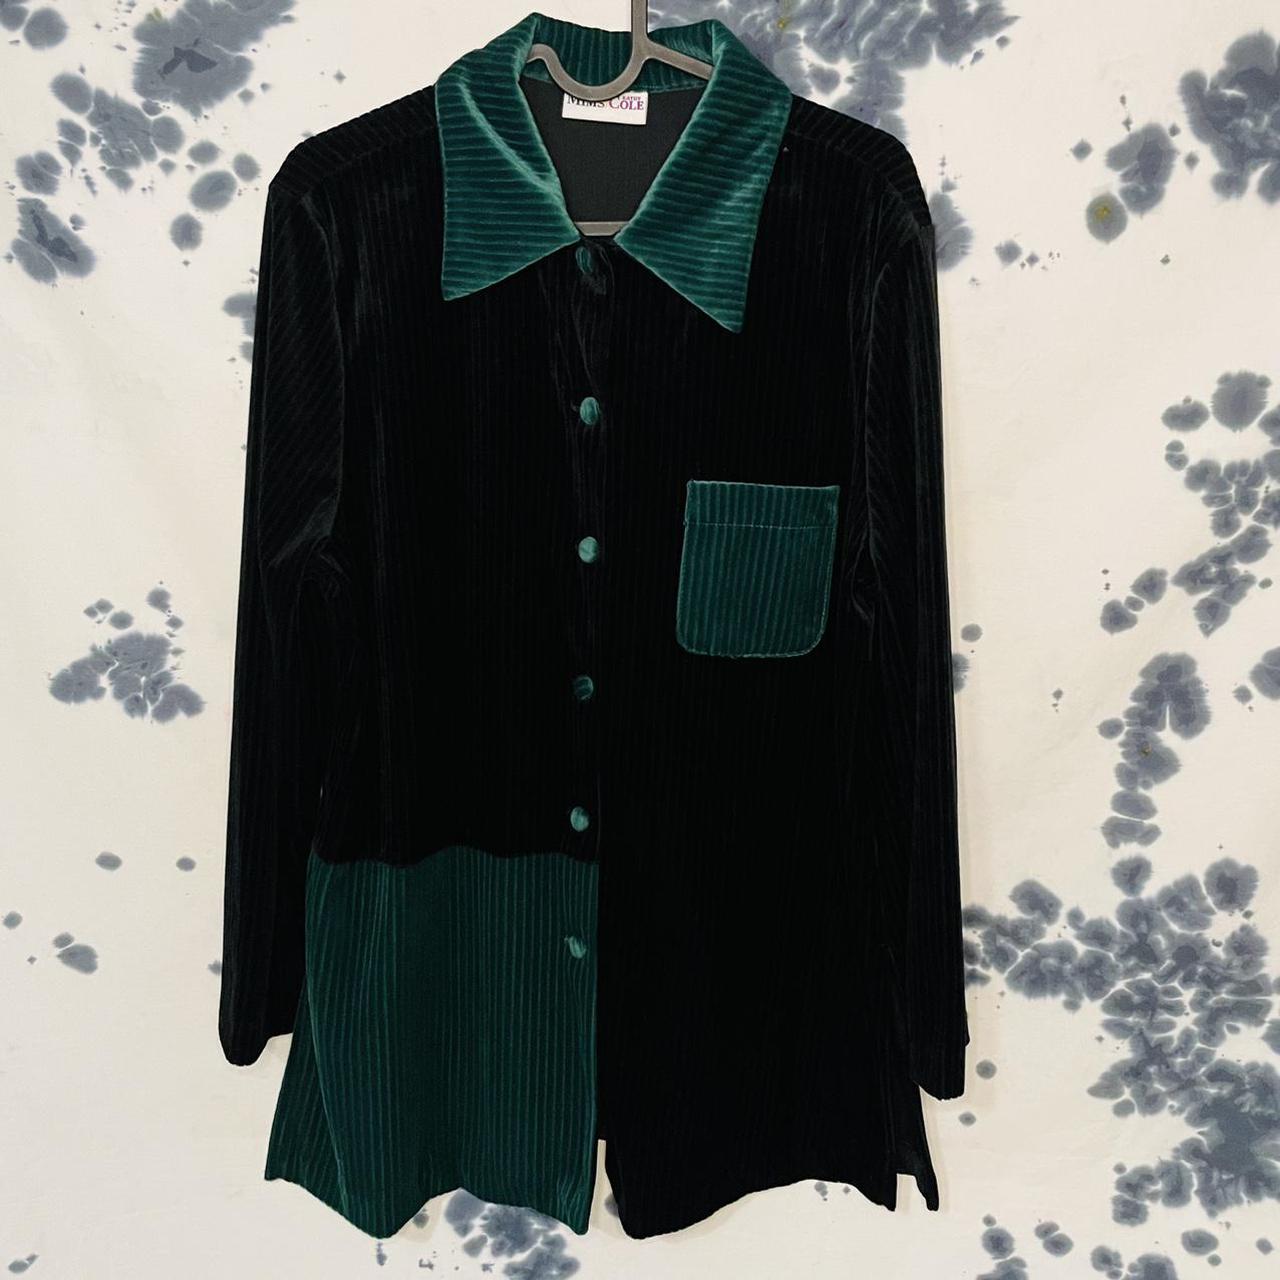 Women's Black and Green